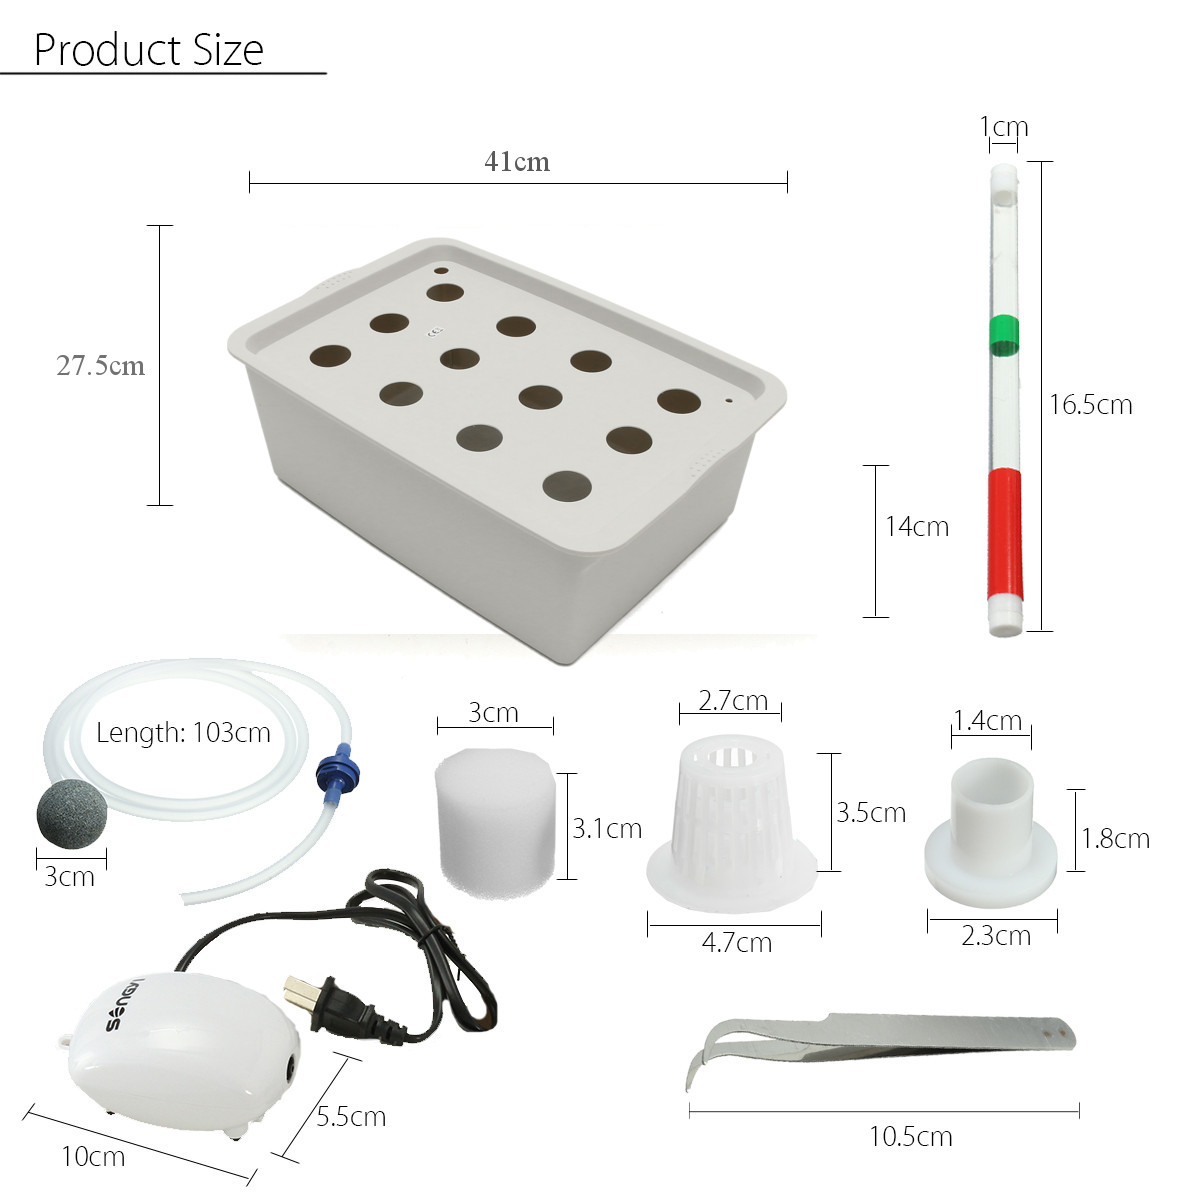 220V Hydroponic System Kit 12 Holes DWC Soilless Cultivation Indoor Water Planting Grow Box 13